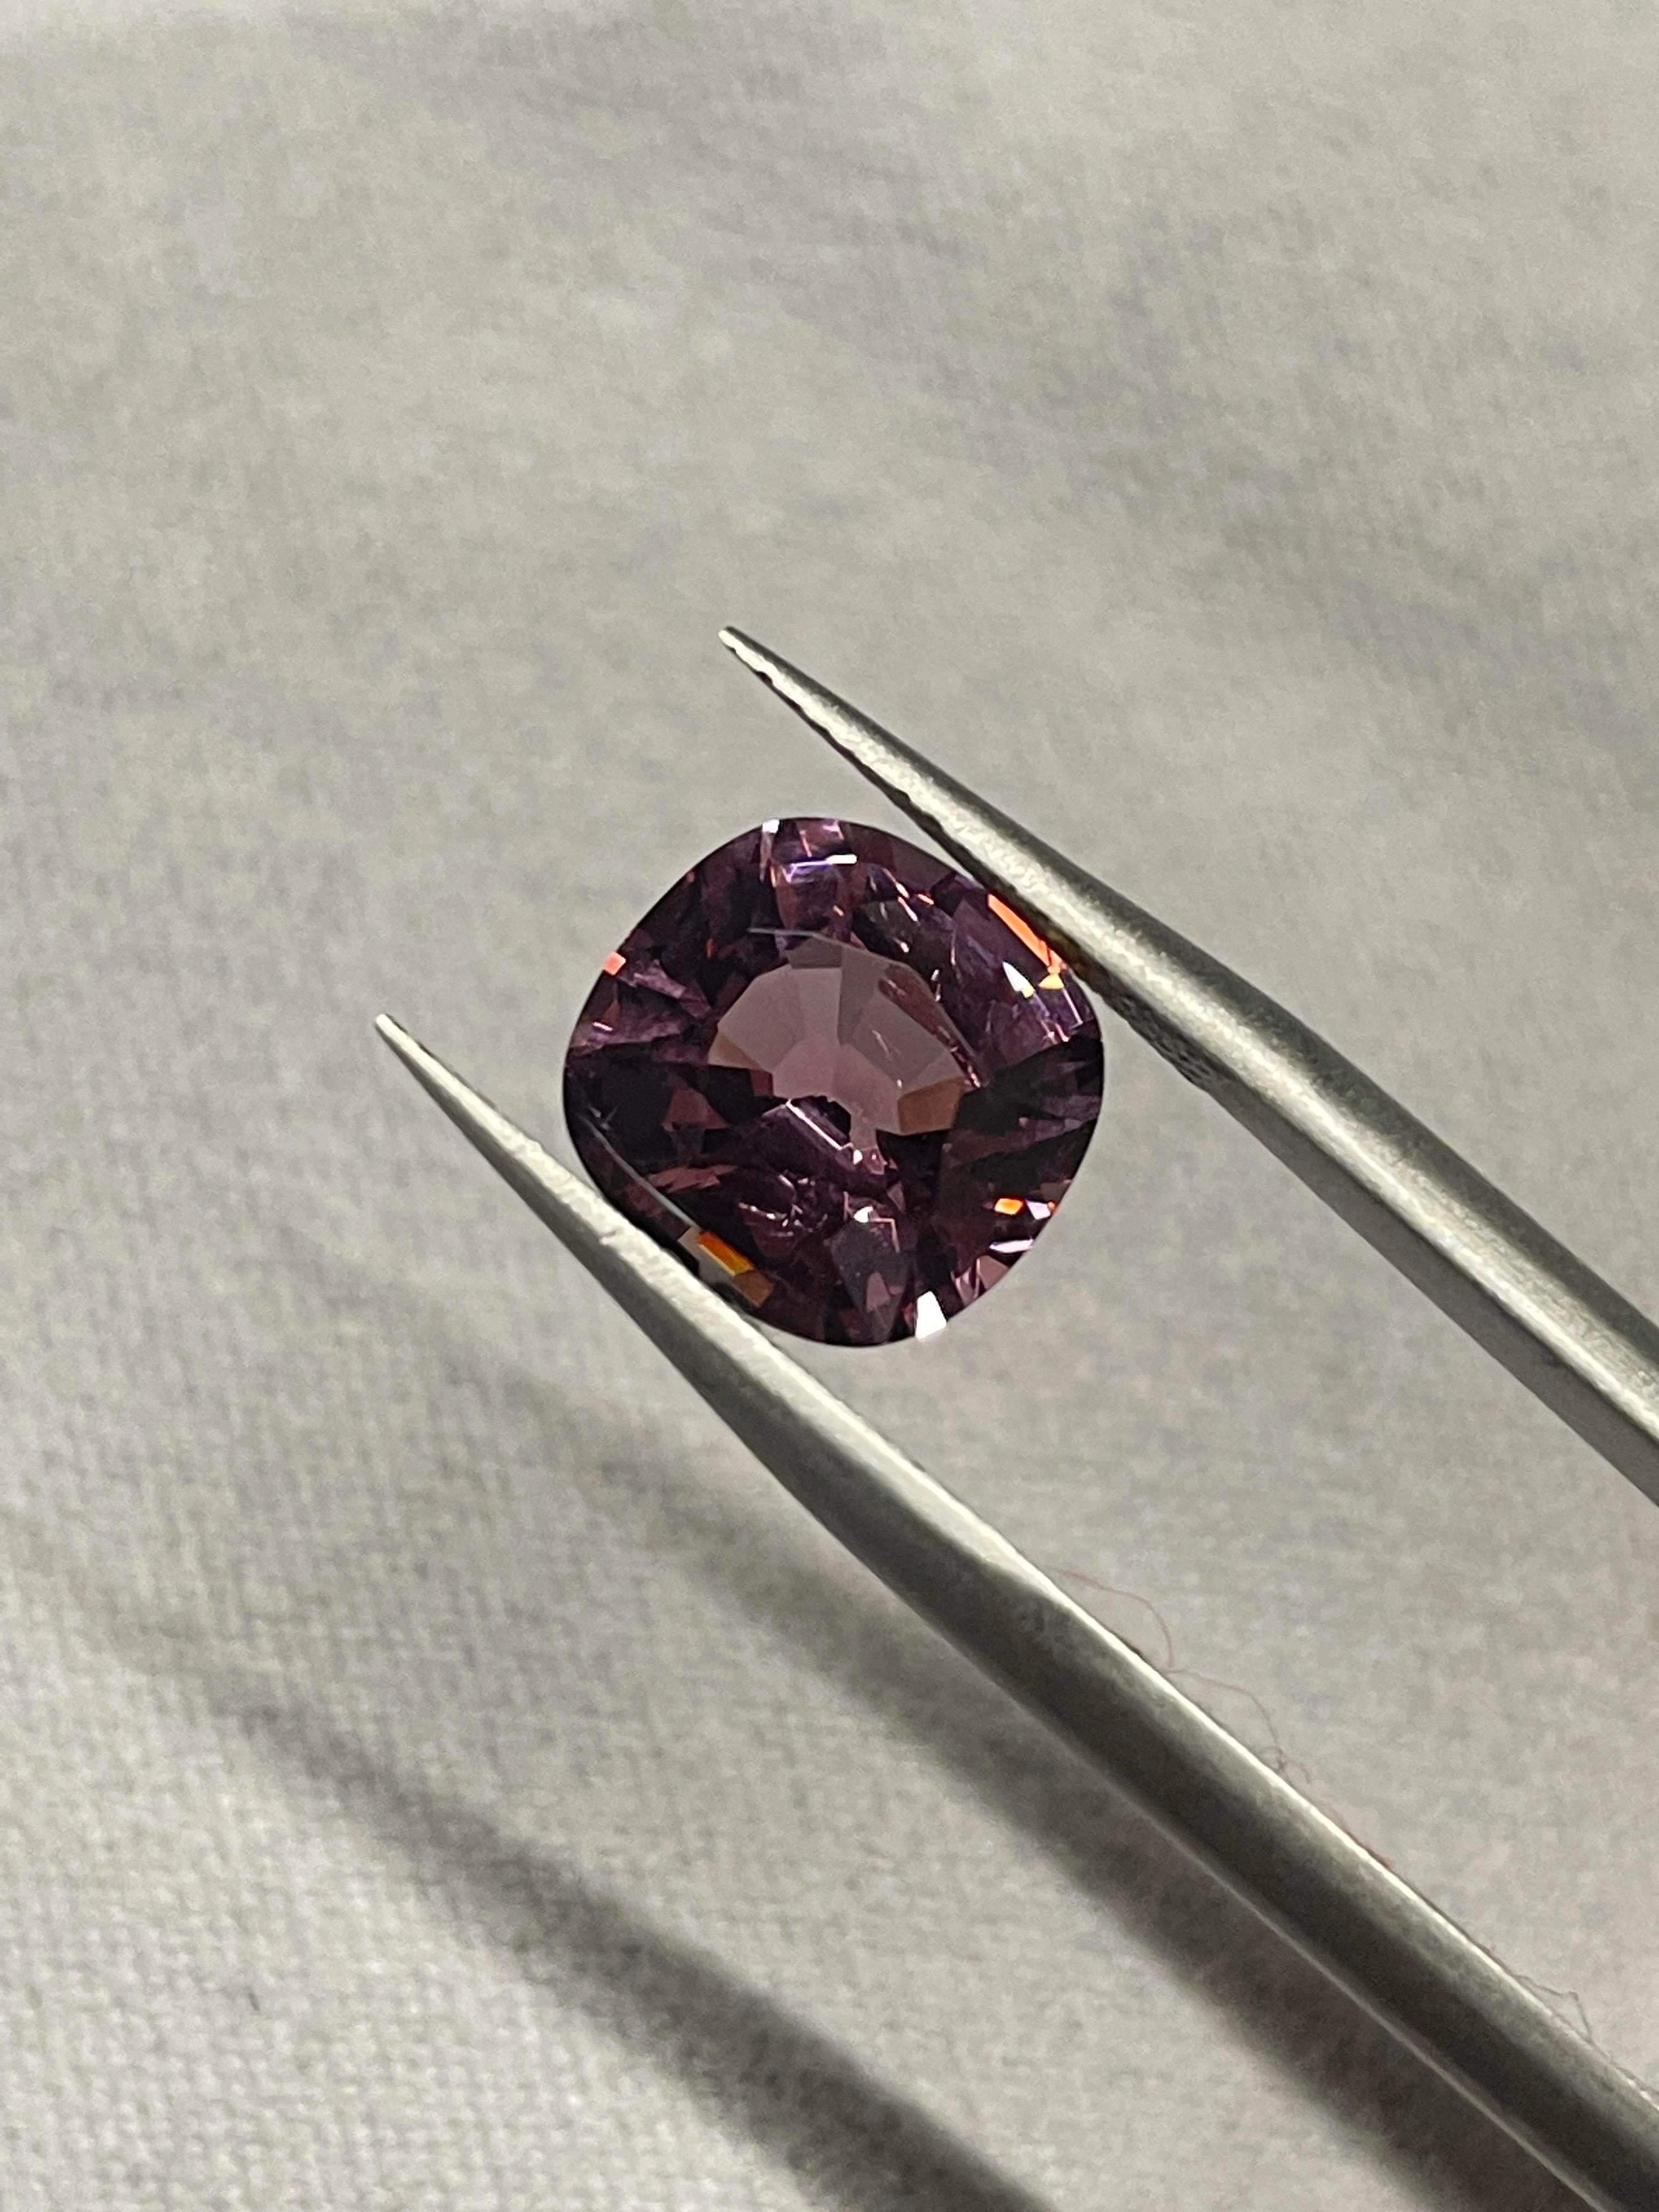 This gem comes from the famous Burma origin, the weight is over 3 carats 3.06 carats to be exact, it has a distinct saturation of pinkish color with slight purple mixed in it, what makes this gem even better is that it has a high clarity with great